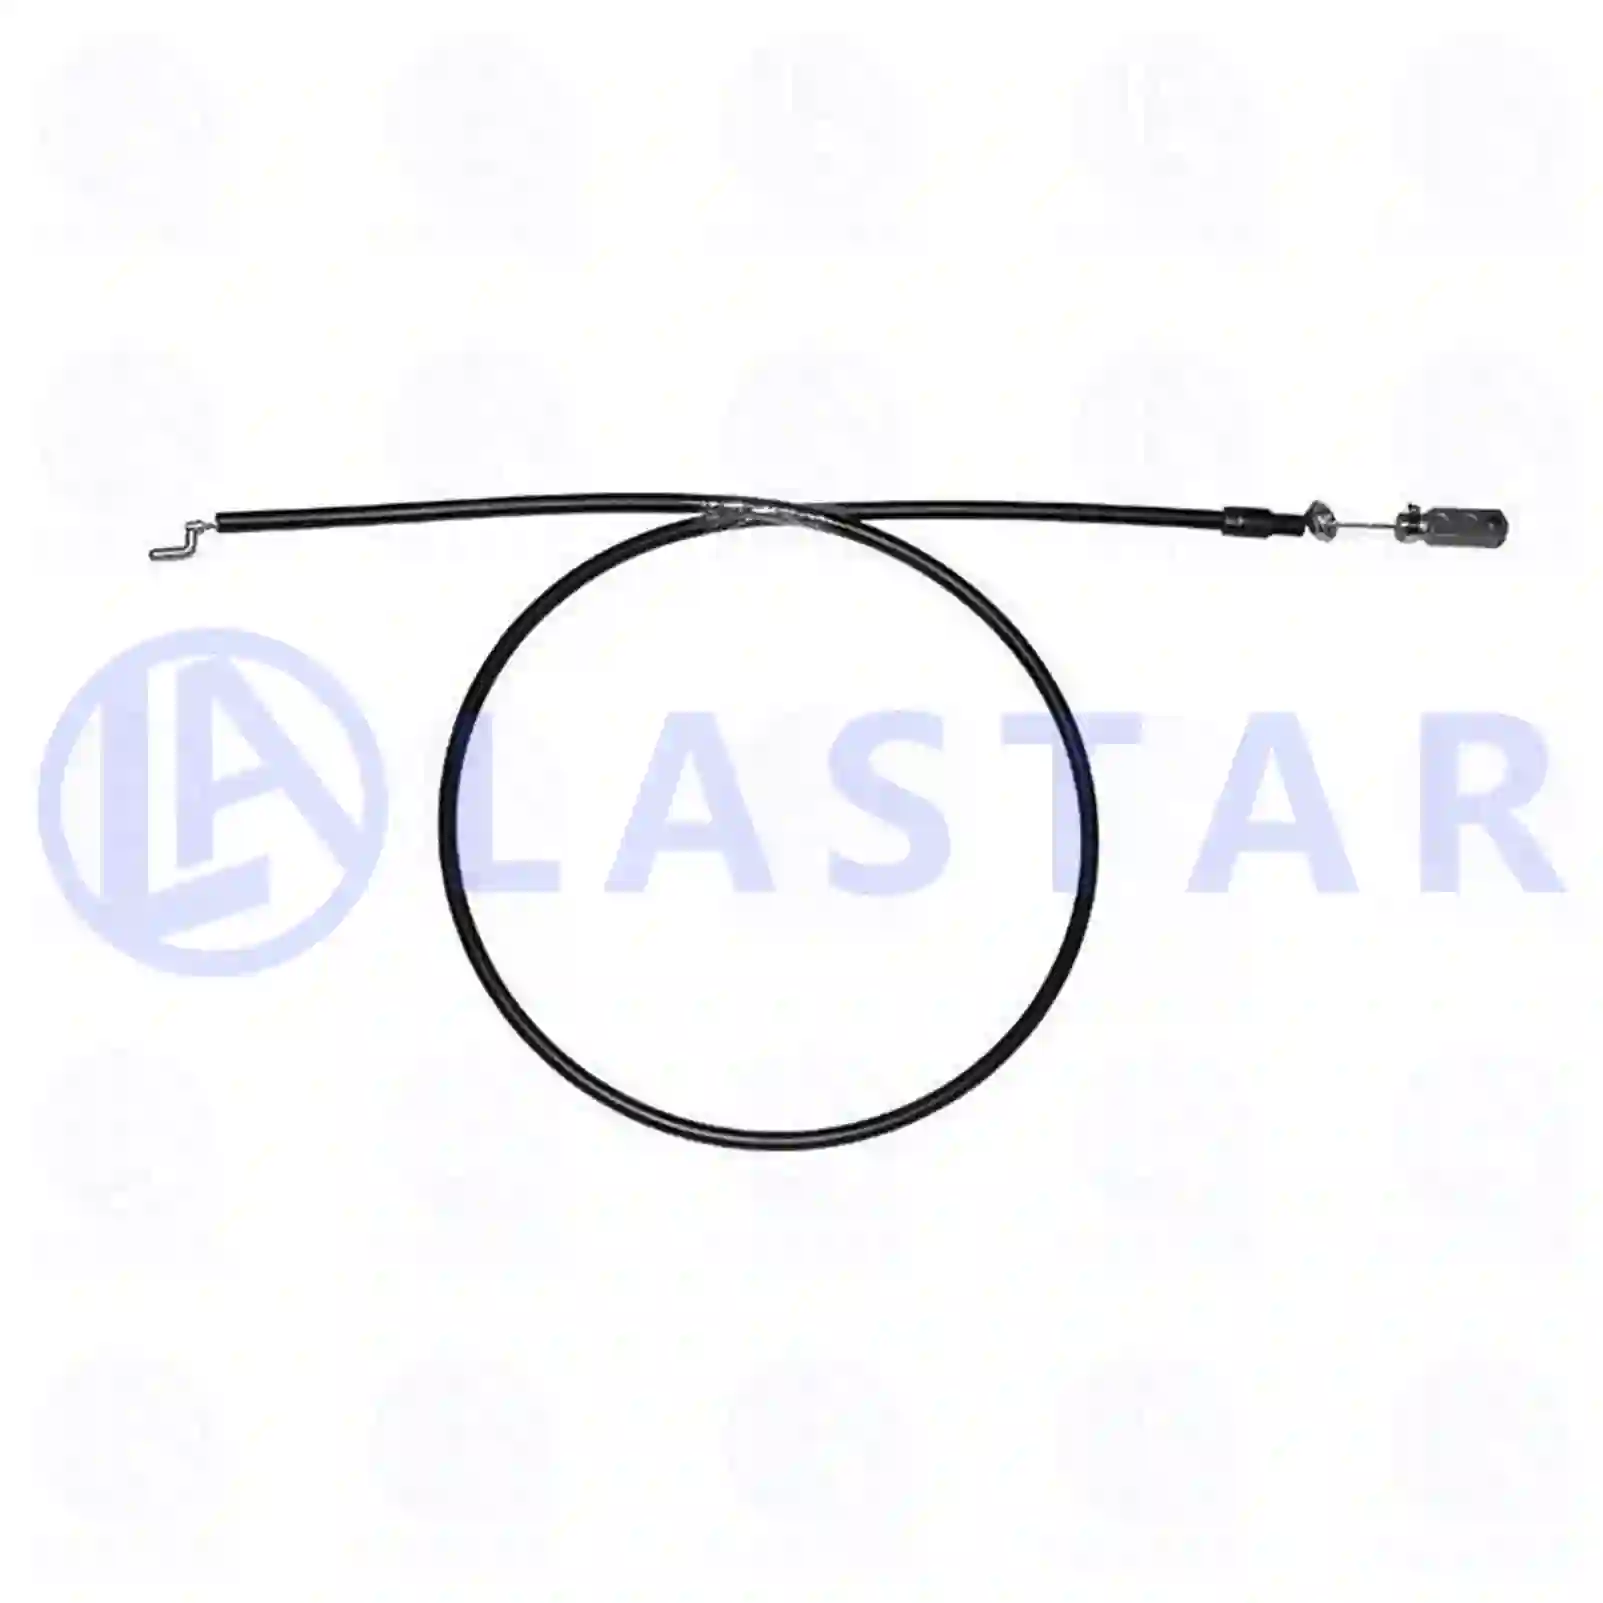 Control wire, front flap, 77721585, 1391364, ZG60424-0008 ||  77721585 Lastar Spare Part | Truck Spare Parts, Auotomotive Spare Parts Control wire, front flap, 77721585, 1391364, ZG60424-0008 ||  77721585 Lastar Spare Part | Truck Spare Parts, Auotomotive Spare Parts